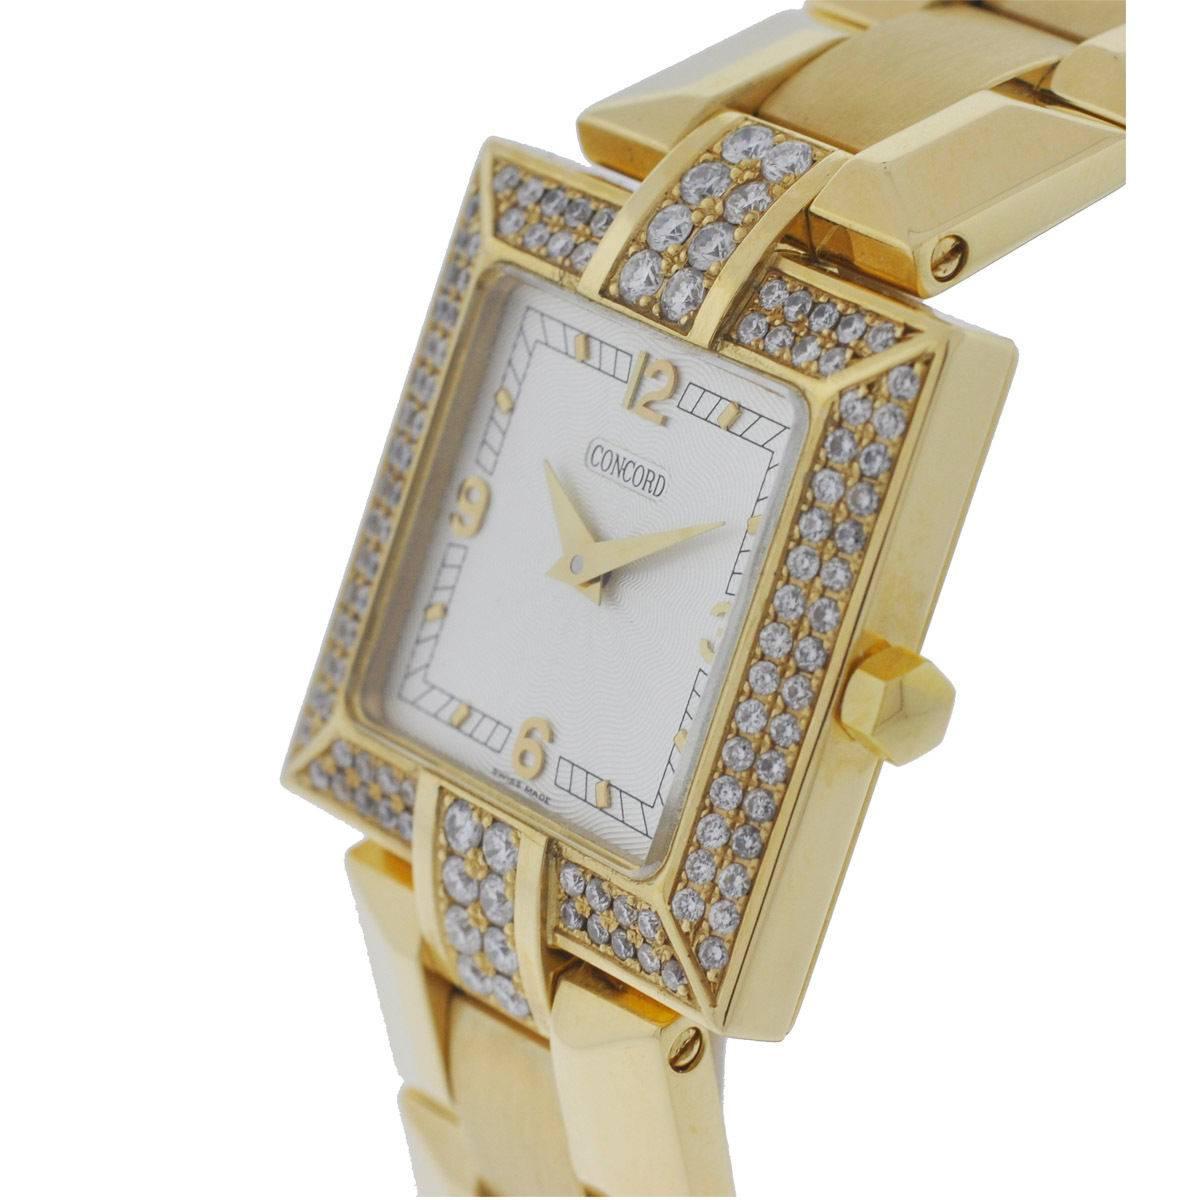 Company - Concord
Model - LA SCALA
Case Metal - 18K Yellow Gold
Case Size - 28mm
Dial - White
Bezel - Diamonds
Bracelet - 18K Yellow Gold
Crystal - Scratch Resistant Sapphire Crystal
Movement - Quartz
Features - Hours and Minutes